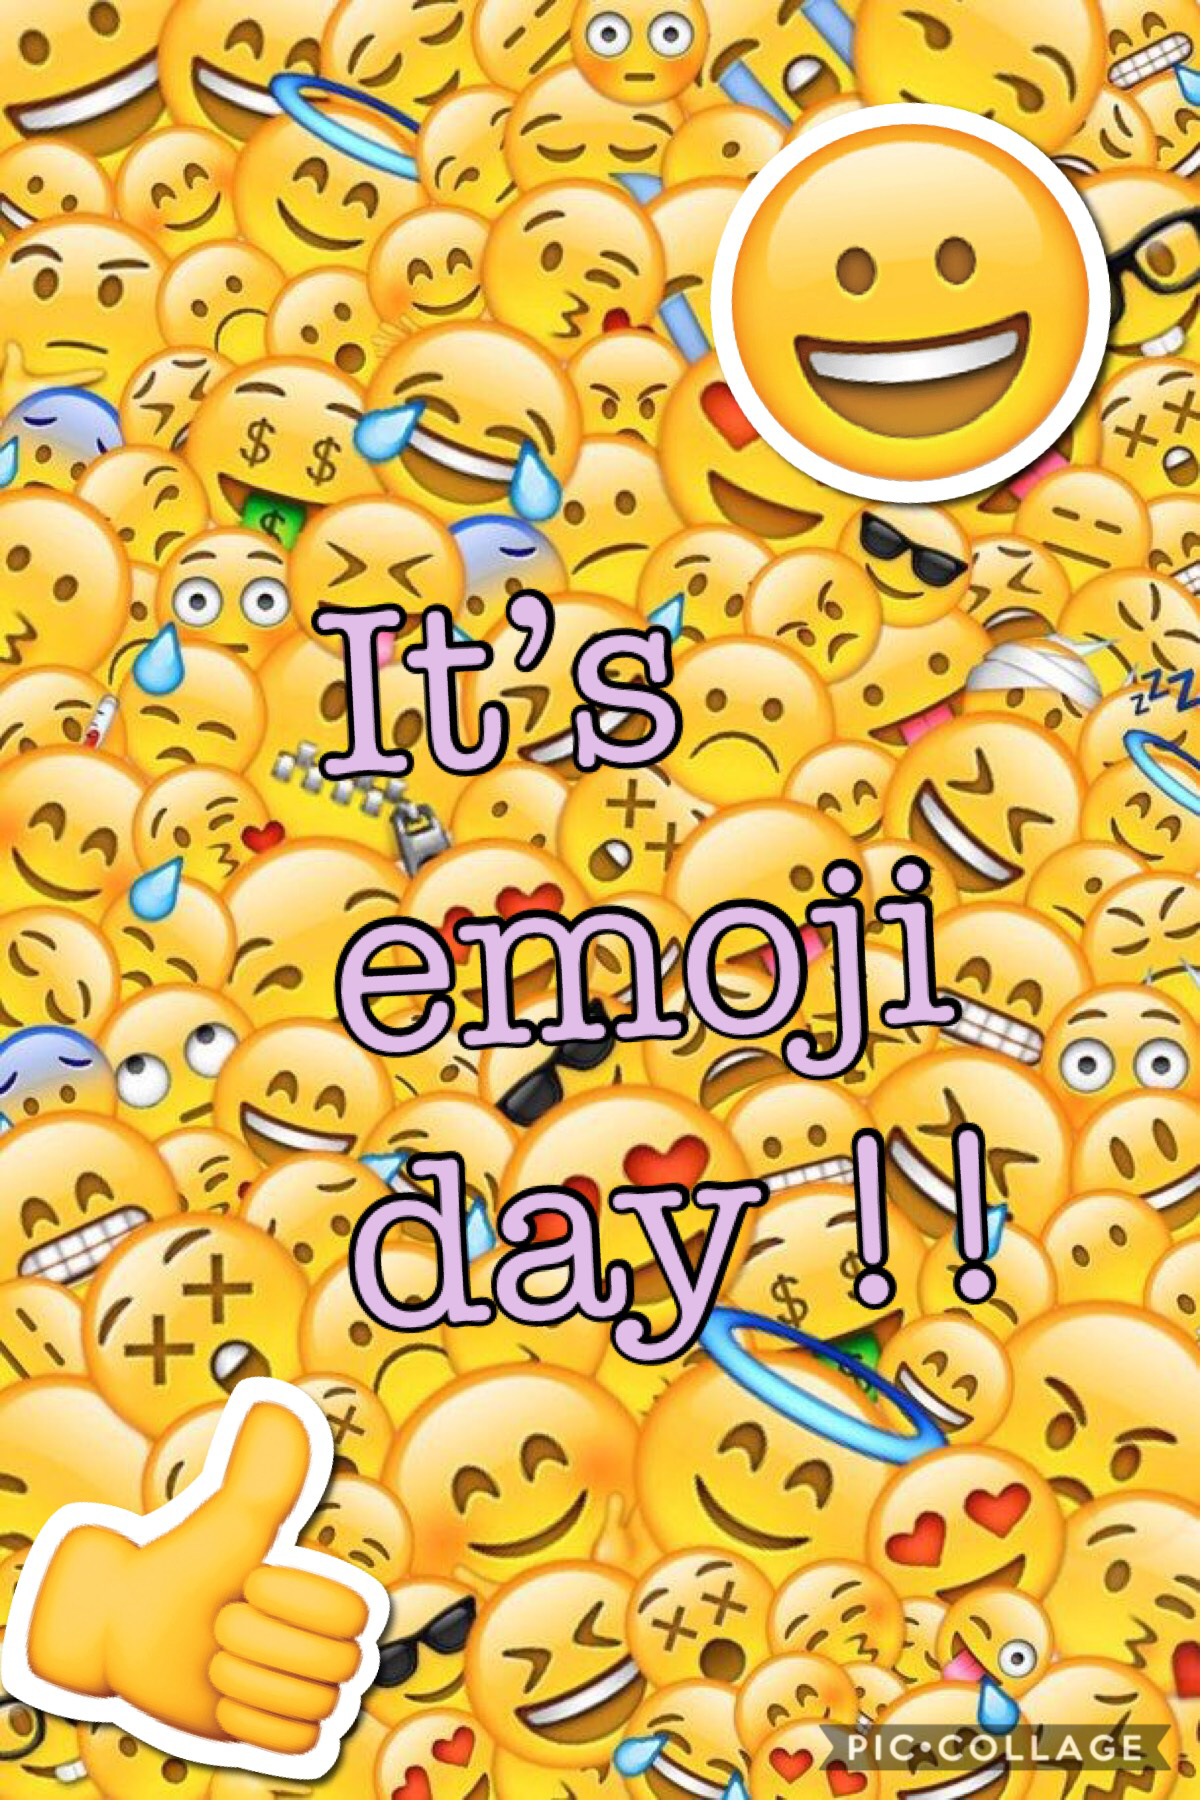 Apparently 70! New emojis are coming out !!